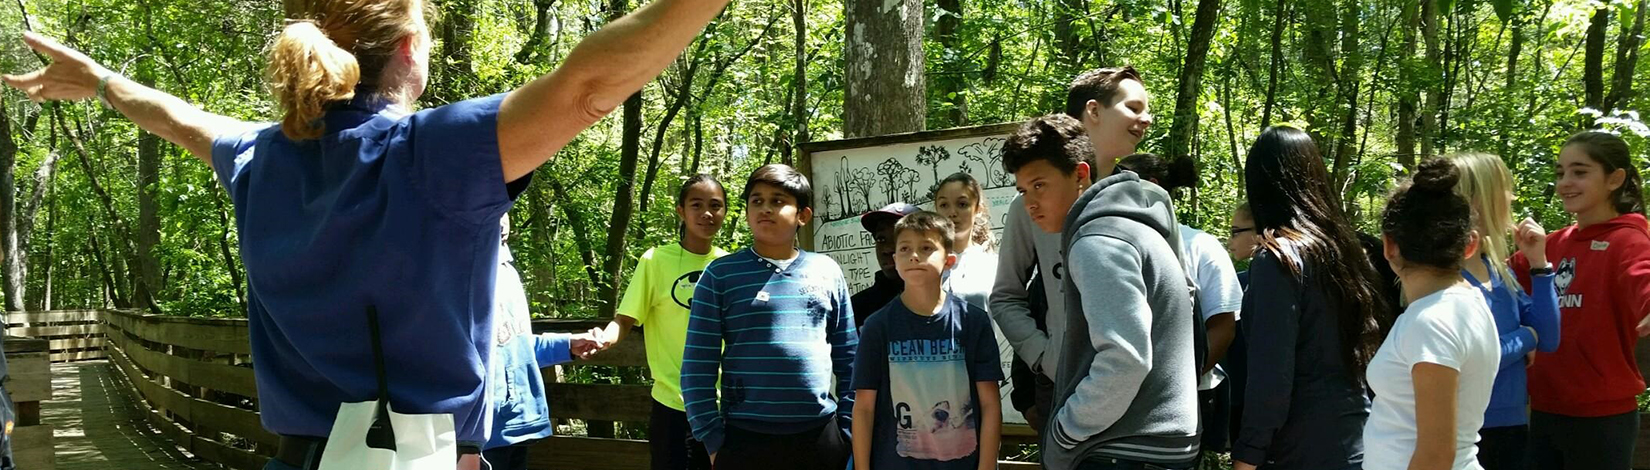 Middle school-age students with teacher in a forest